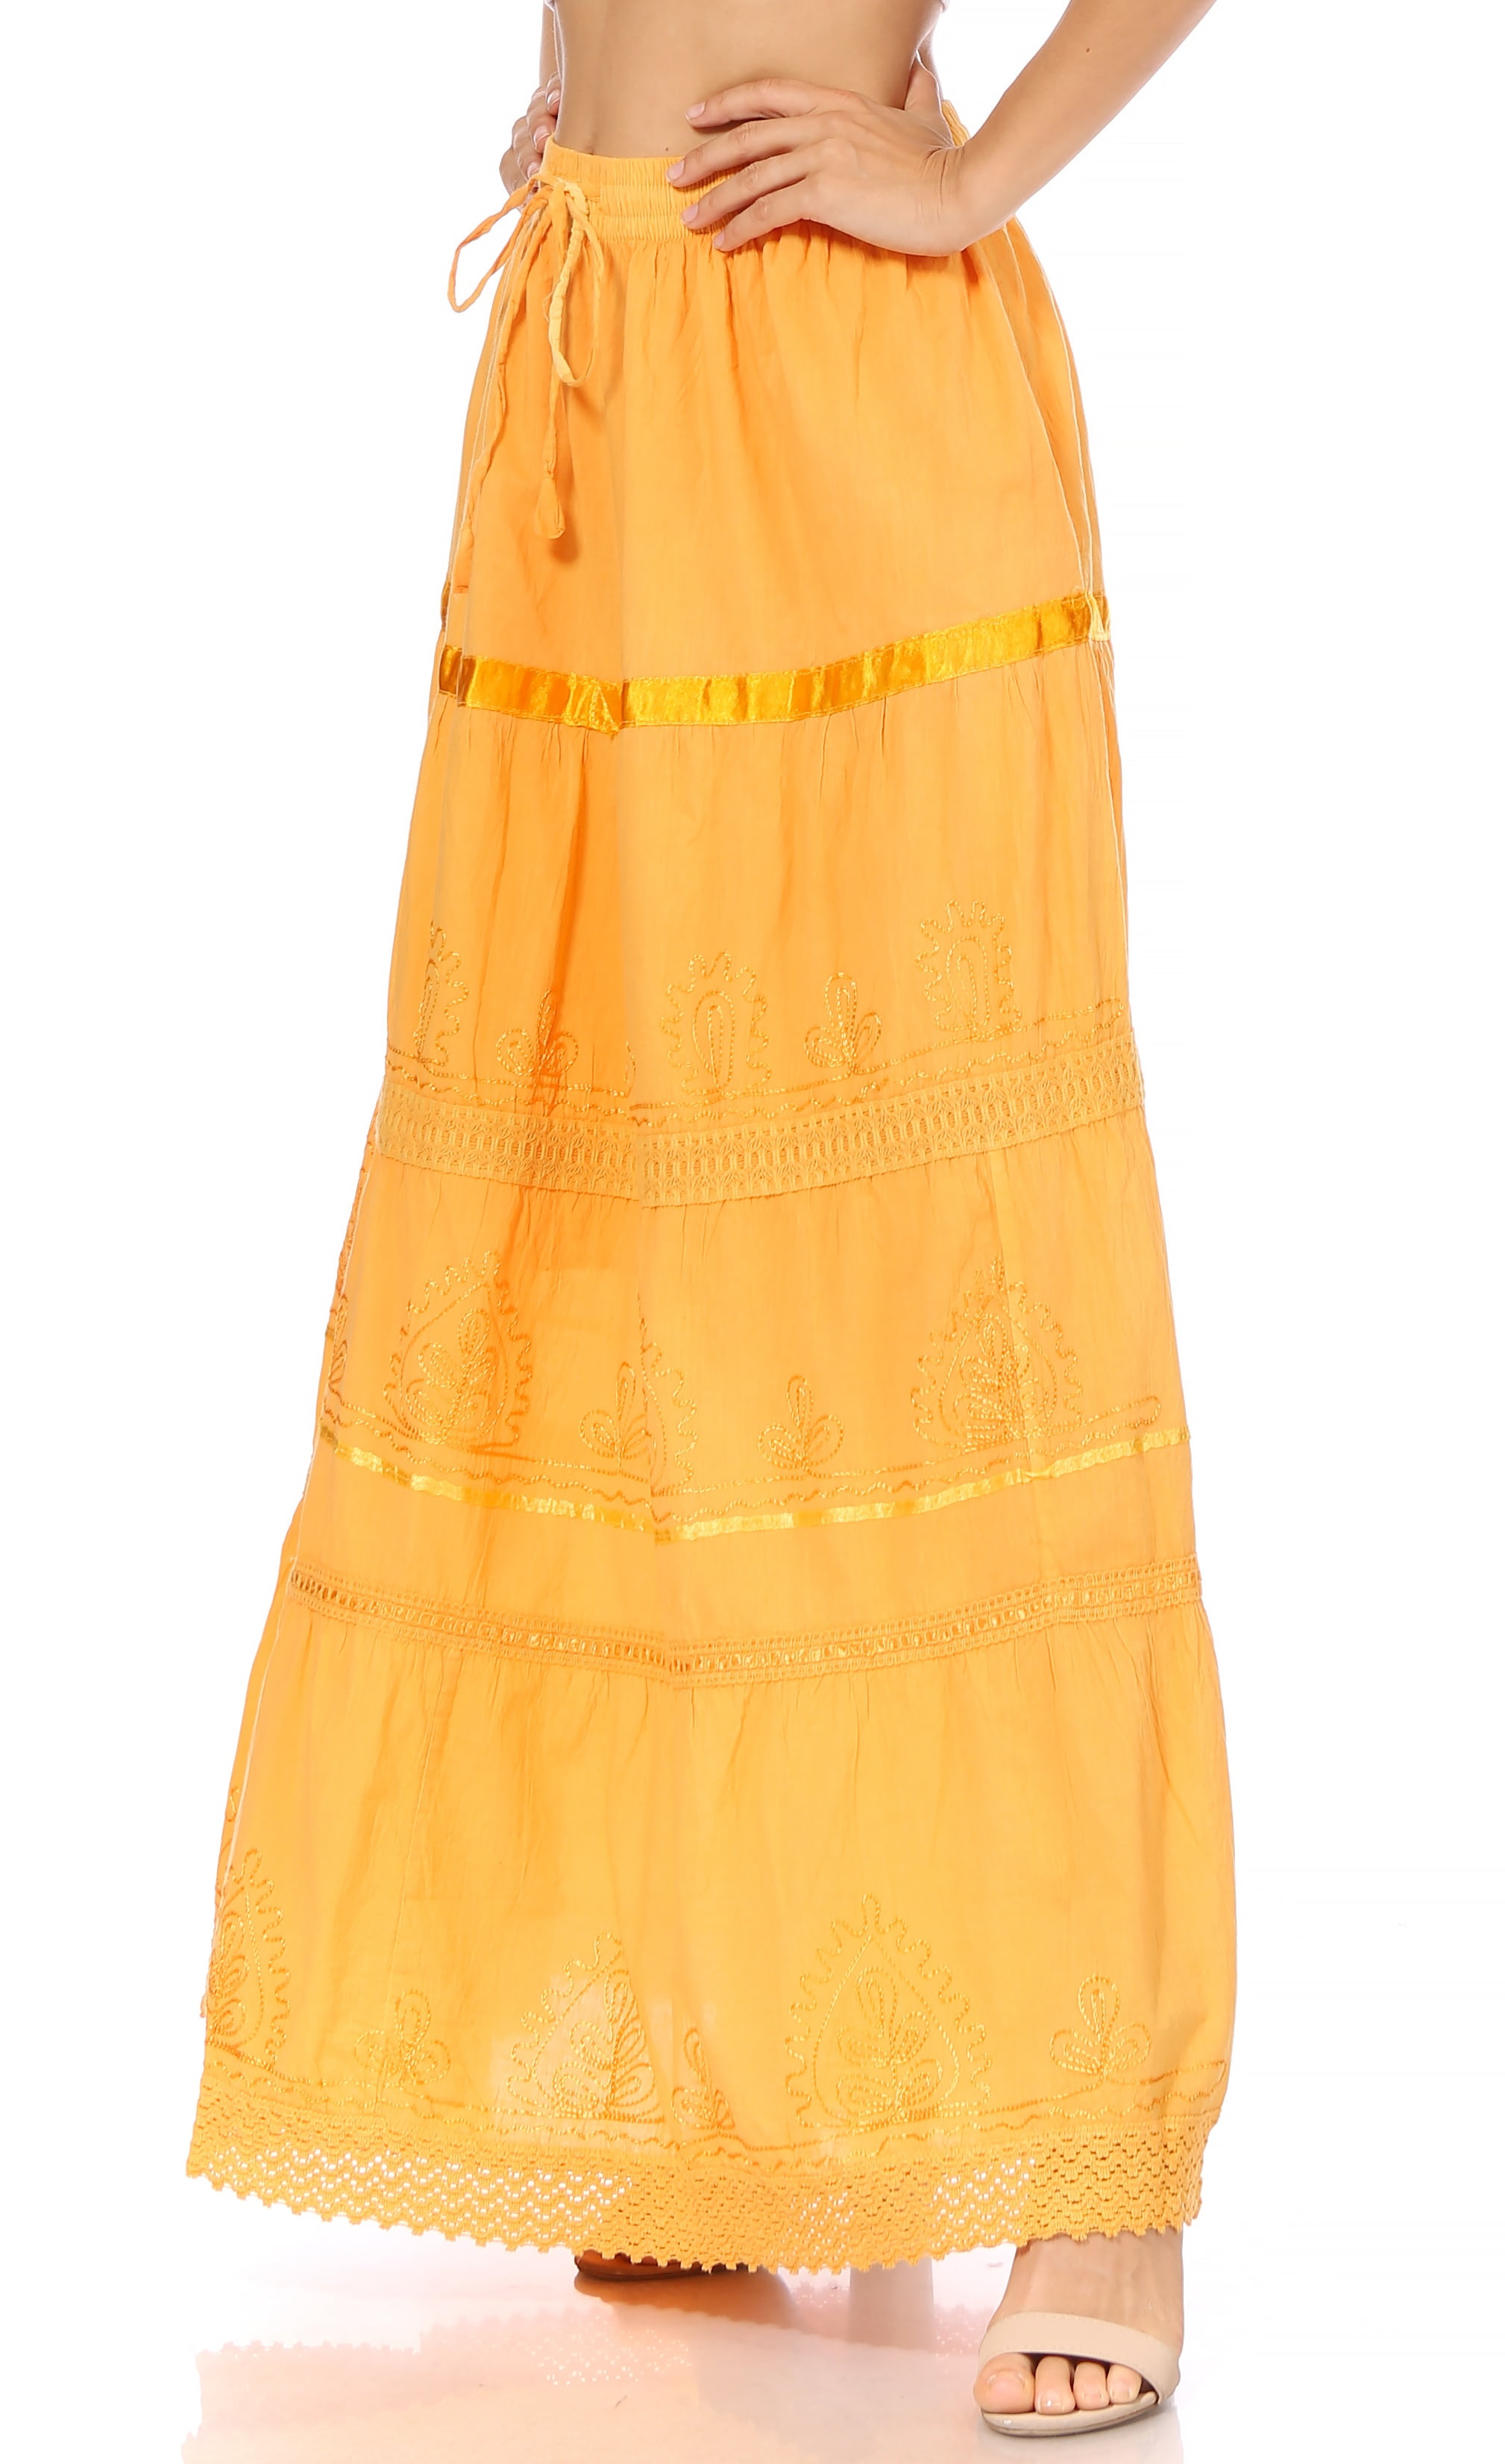 Sakkas Solid Embroidered Gypsy / Bohemian Full / Maxi / Long Cotton Skirt -  Yellow - One Size - Walmart.com